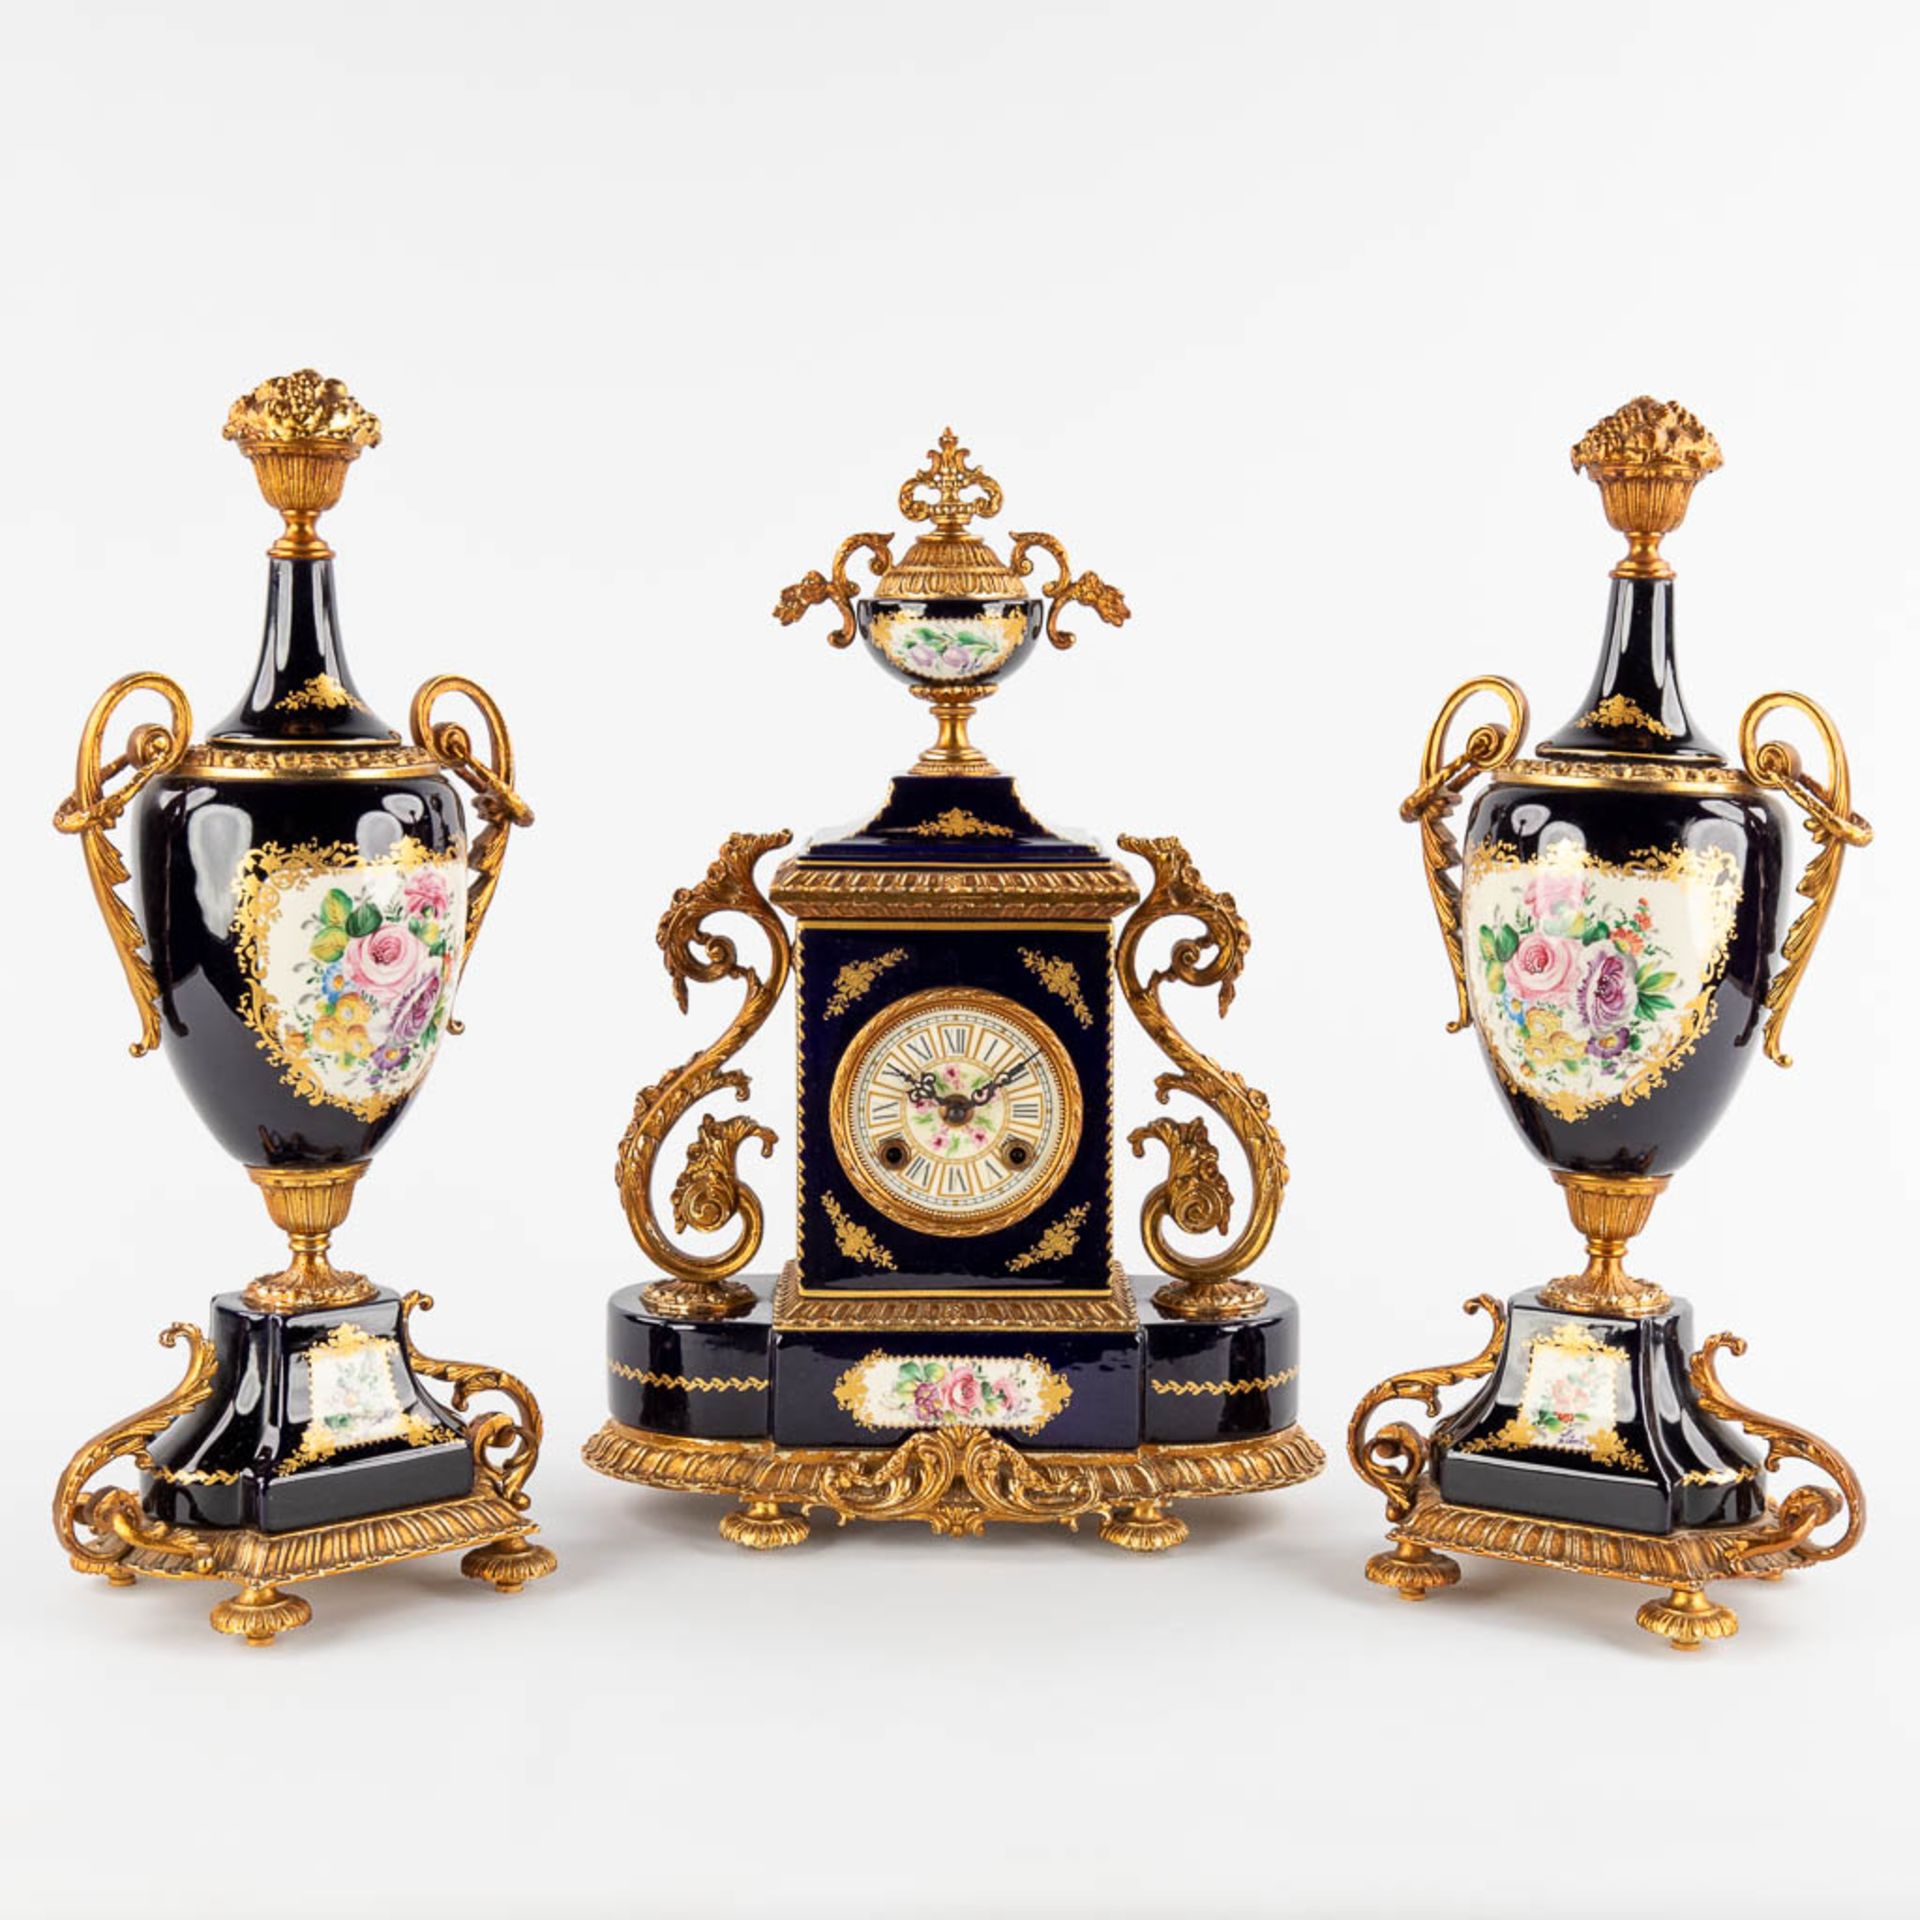 A.C.F. A three-piece mantle garniture clock and side pieces, cobalt blue porcelain mounted with bron